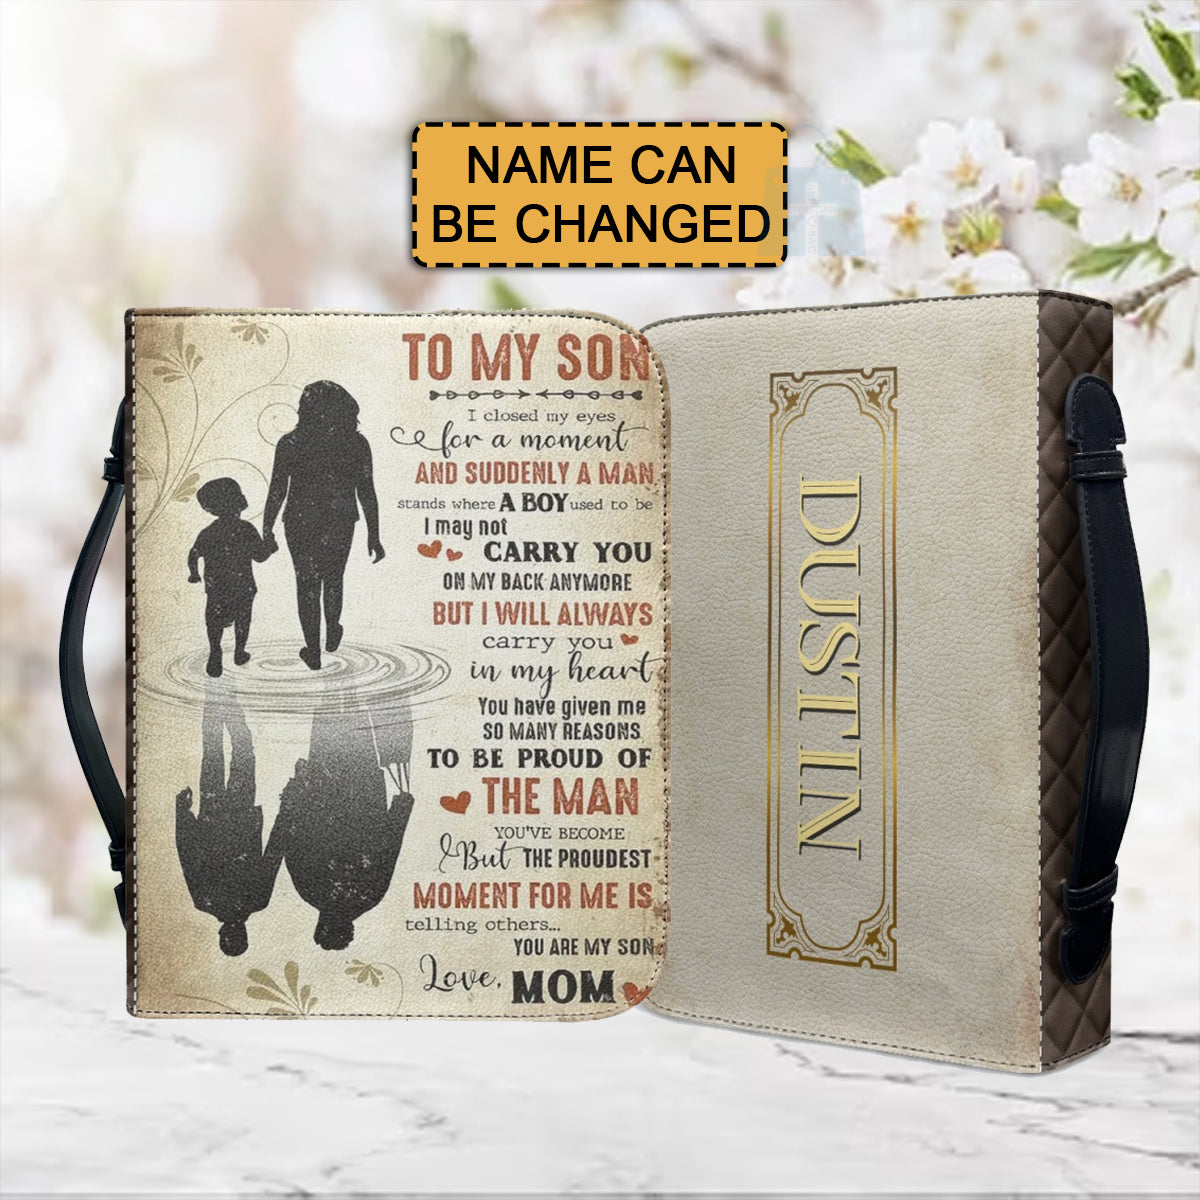 Christianartbag Bible Cover, To My Son From Mom Bible Cover, Personalized Bible Cover, Art Design Bible Cover, Christian Gifts, CAB01061223. - Christian Art Bag